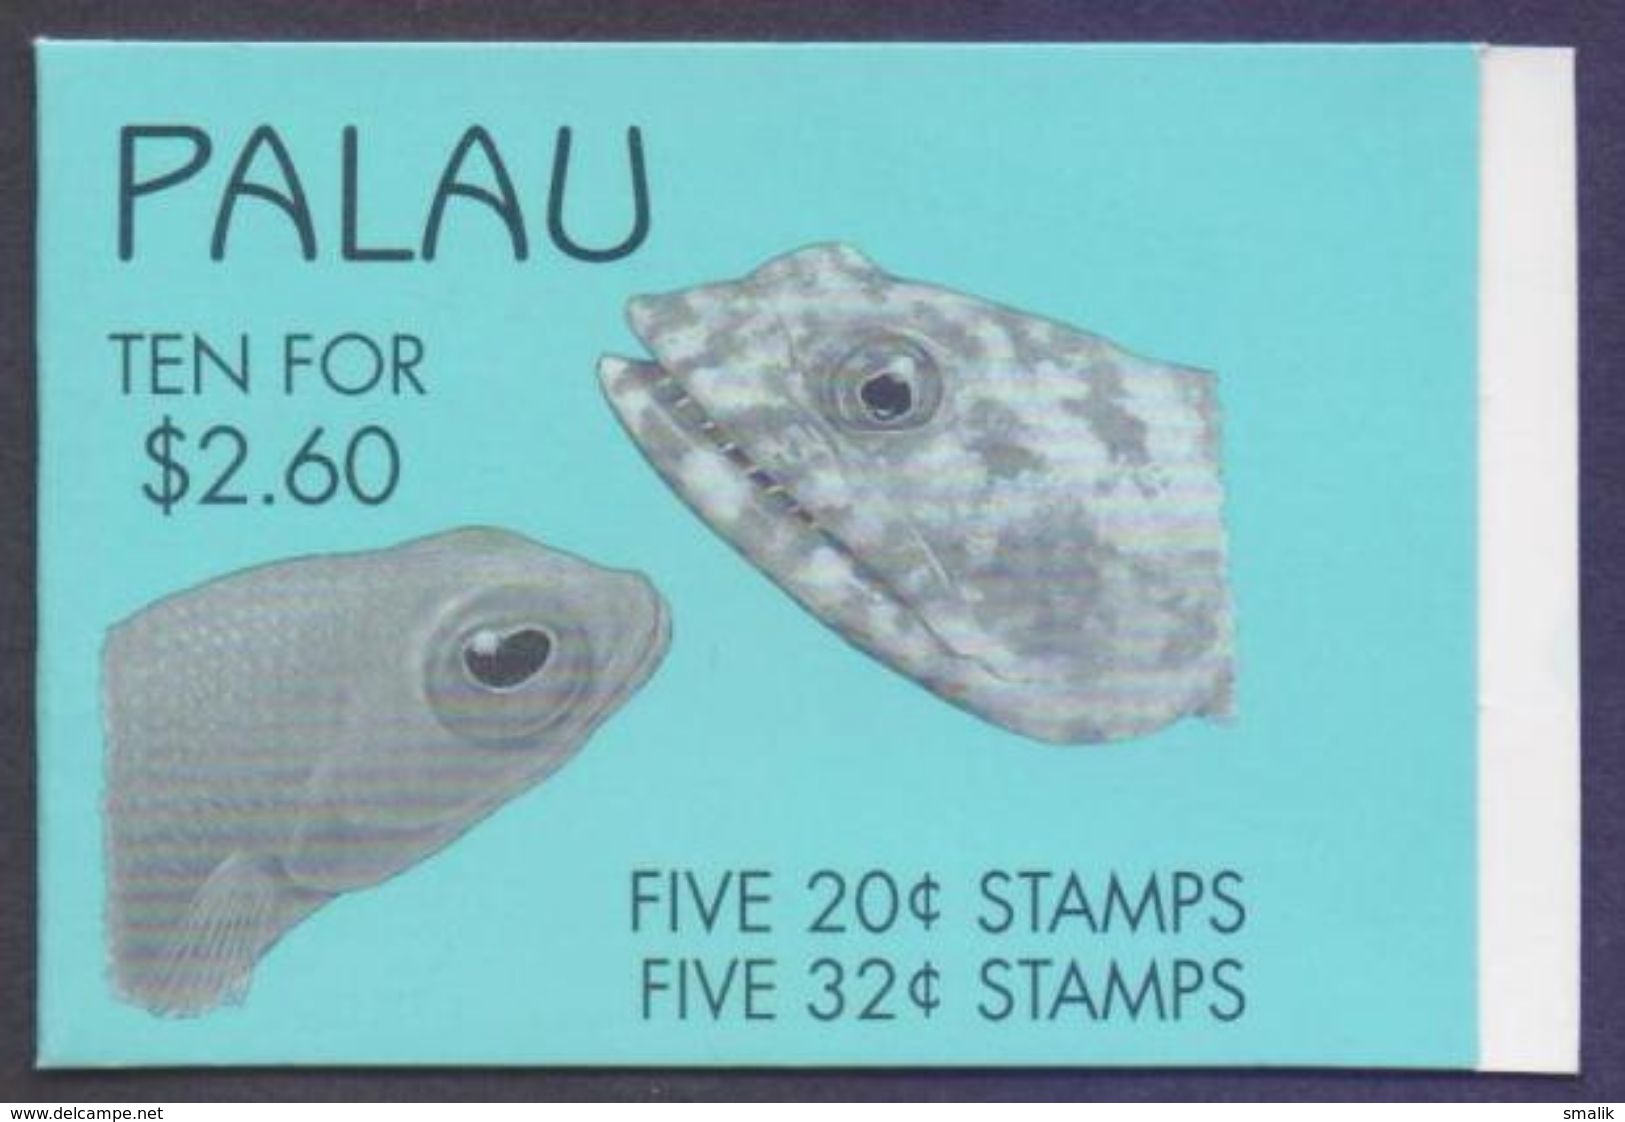 Republic Of PALAU 1995 - MNH Complete Booklet On Fishes, 5 Stamps Of 20c & 5 Stamps Of 32c - Palau